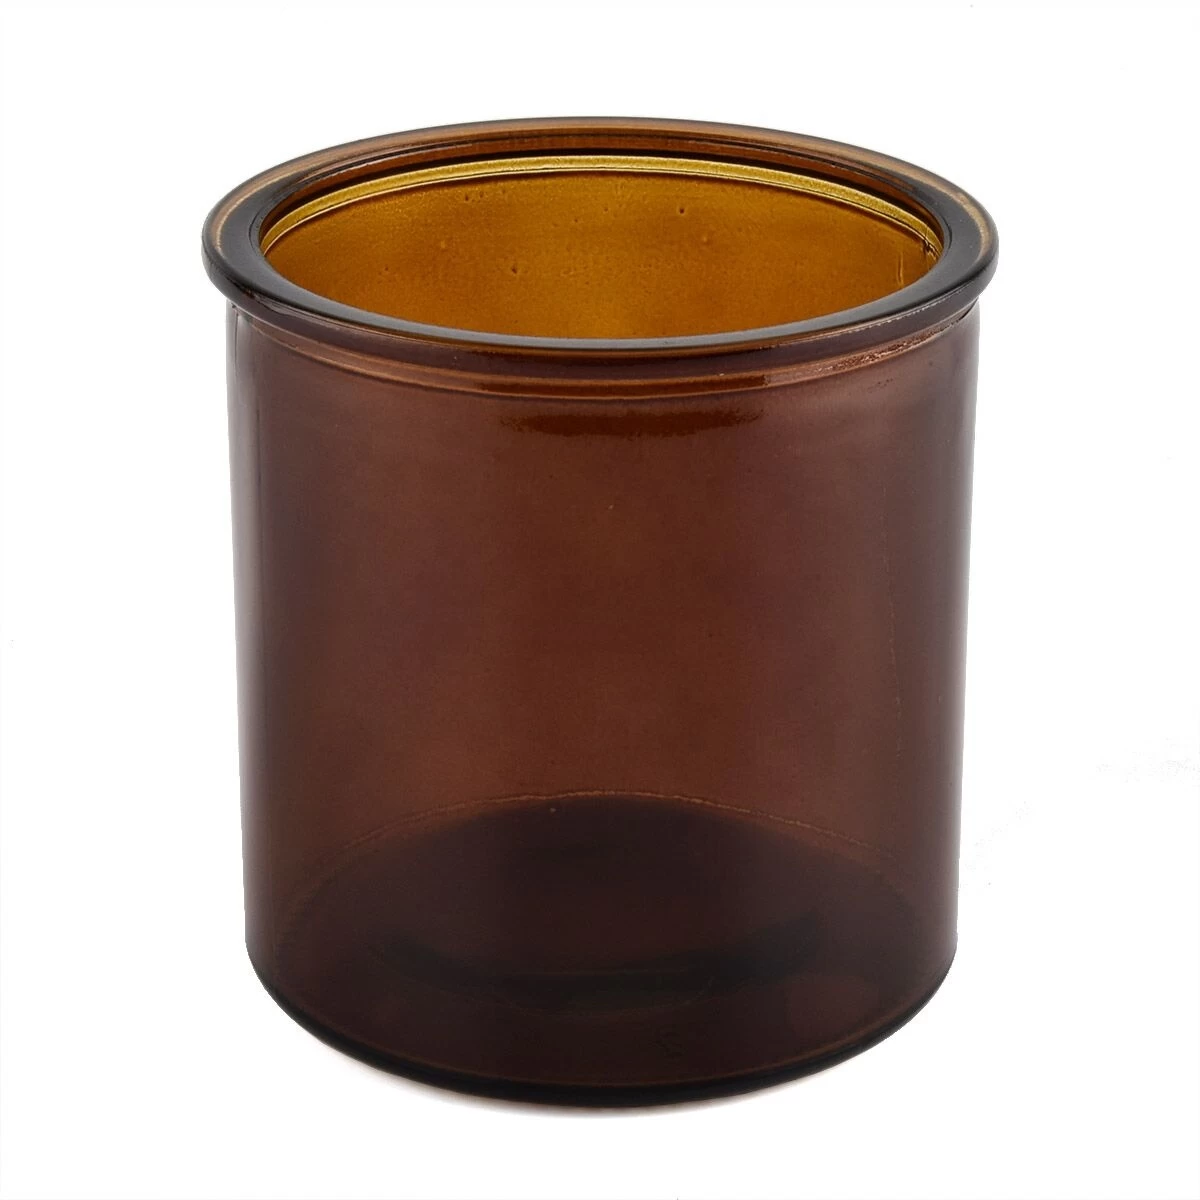 5oz glass candle jar with cork lid for wholesale